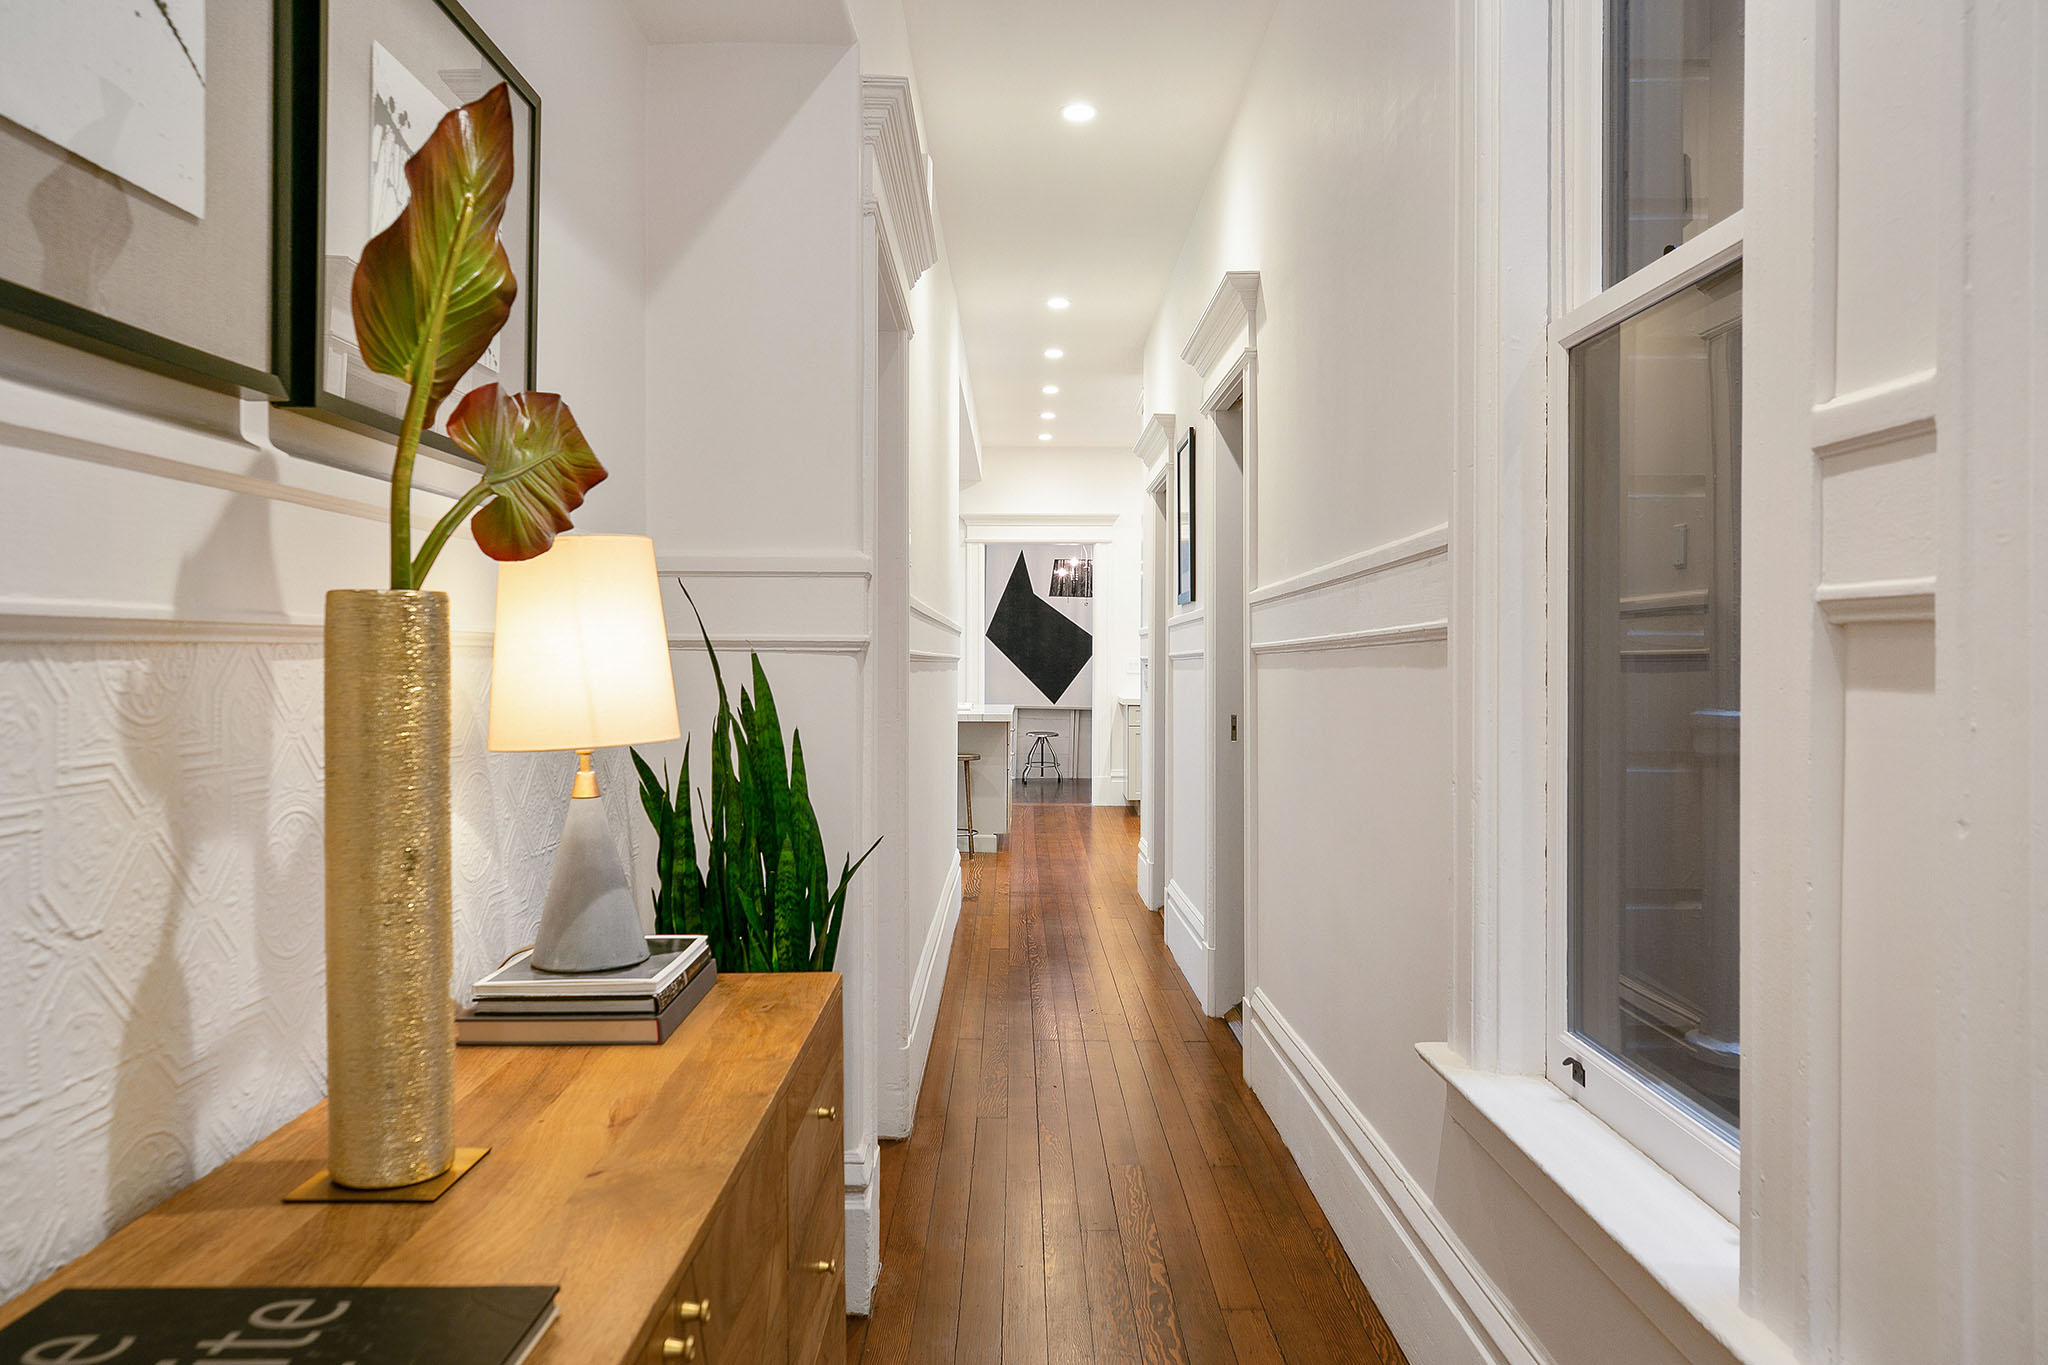 Property Photo: View of the hallway, featuring wood floors and white wainscoting